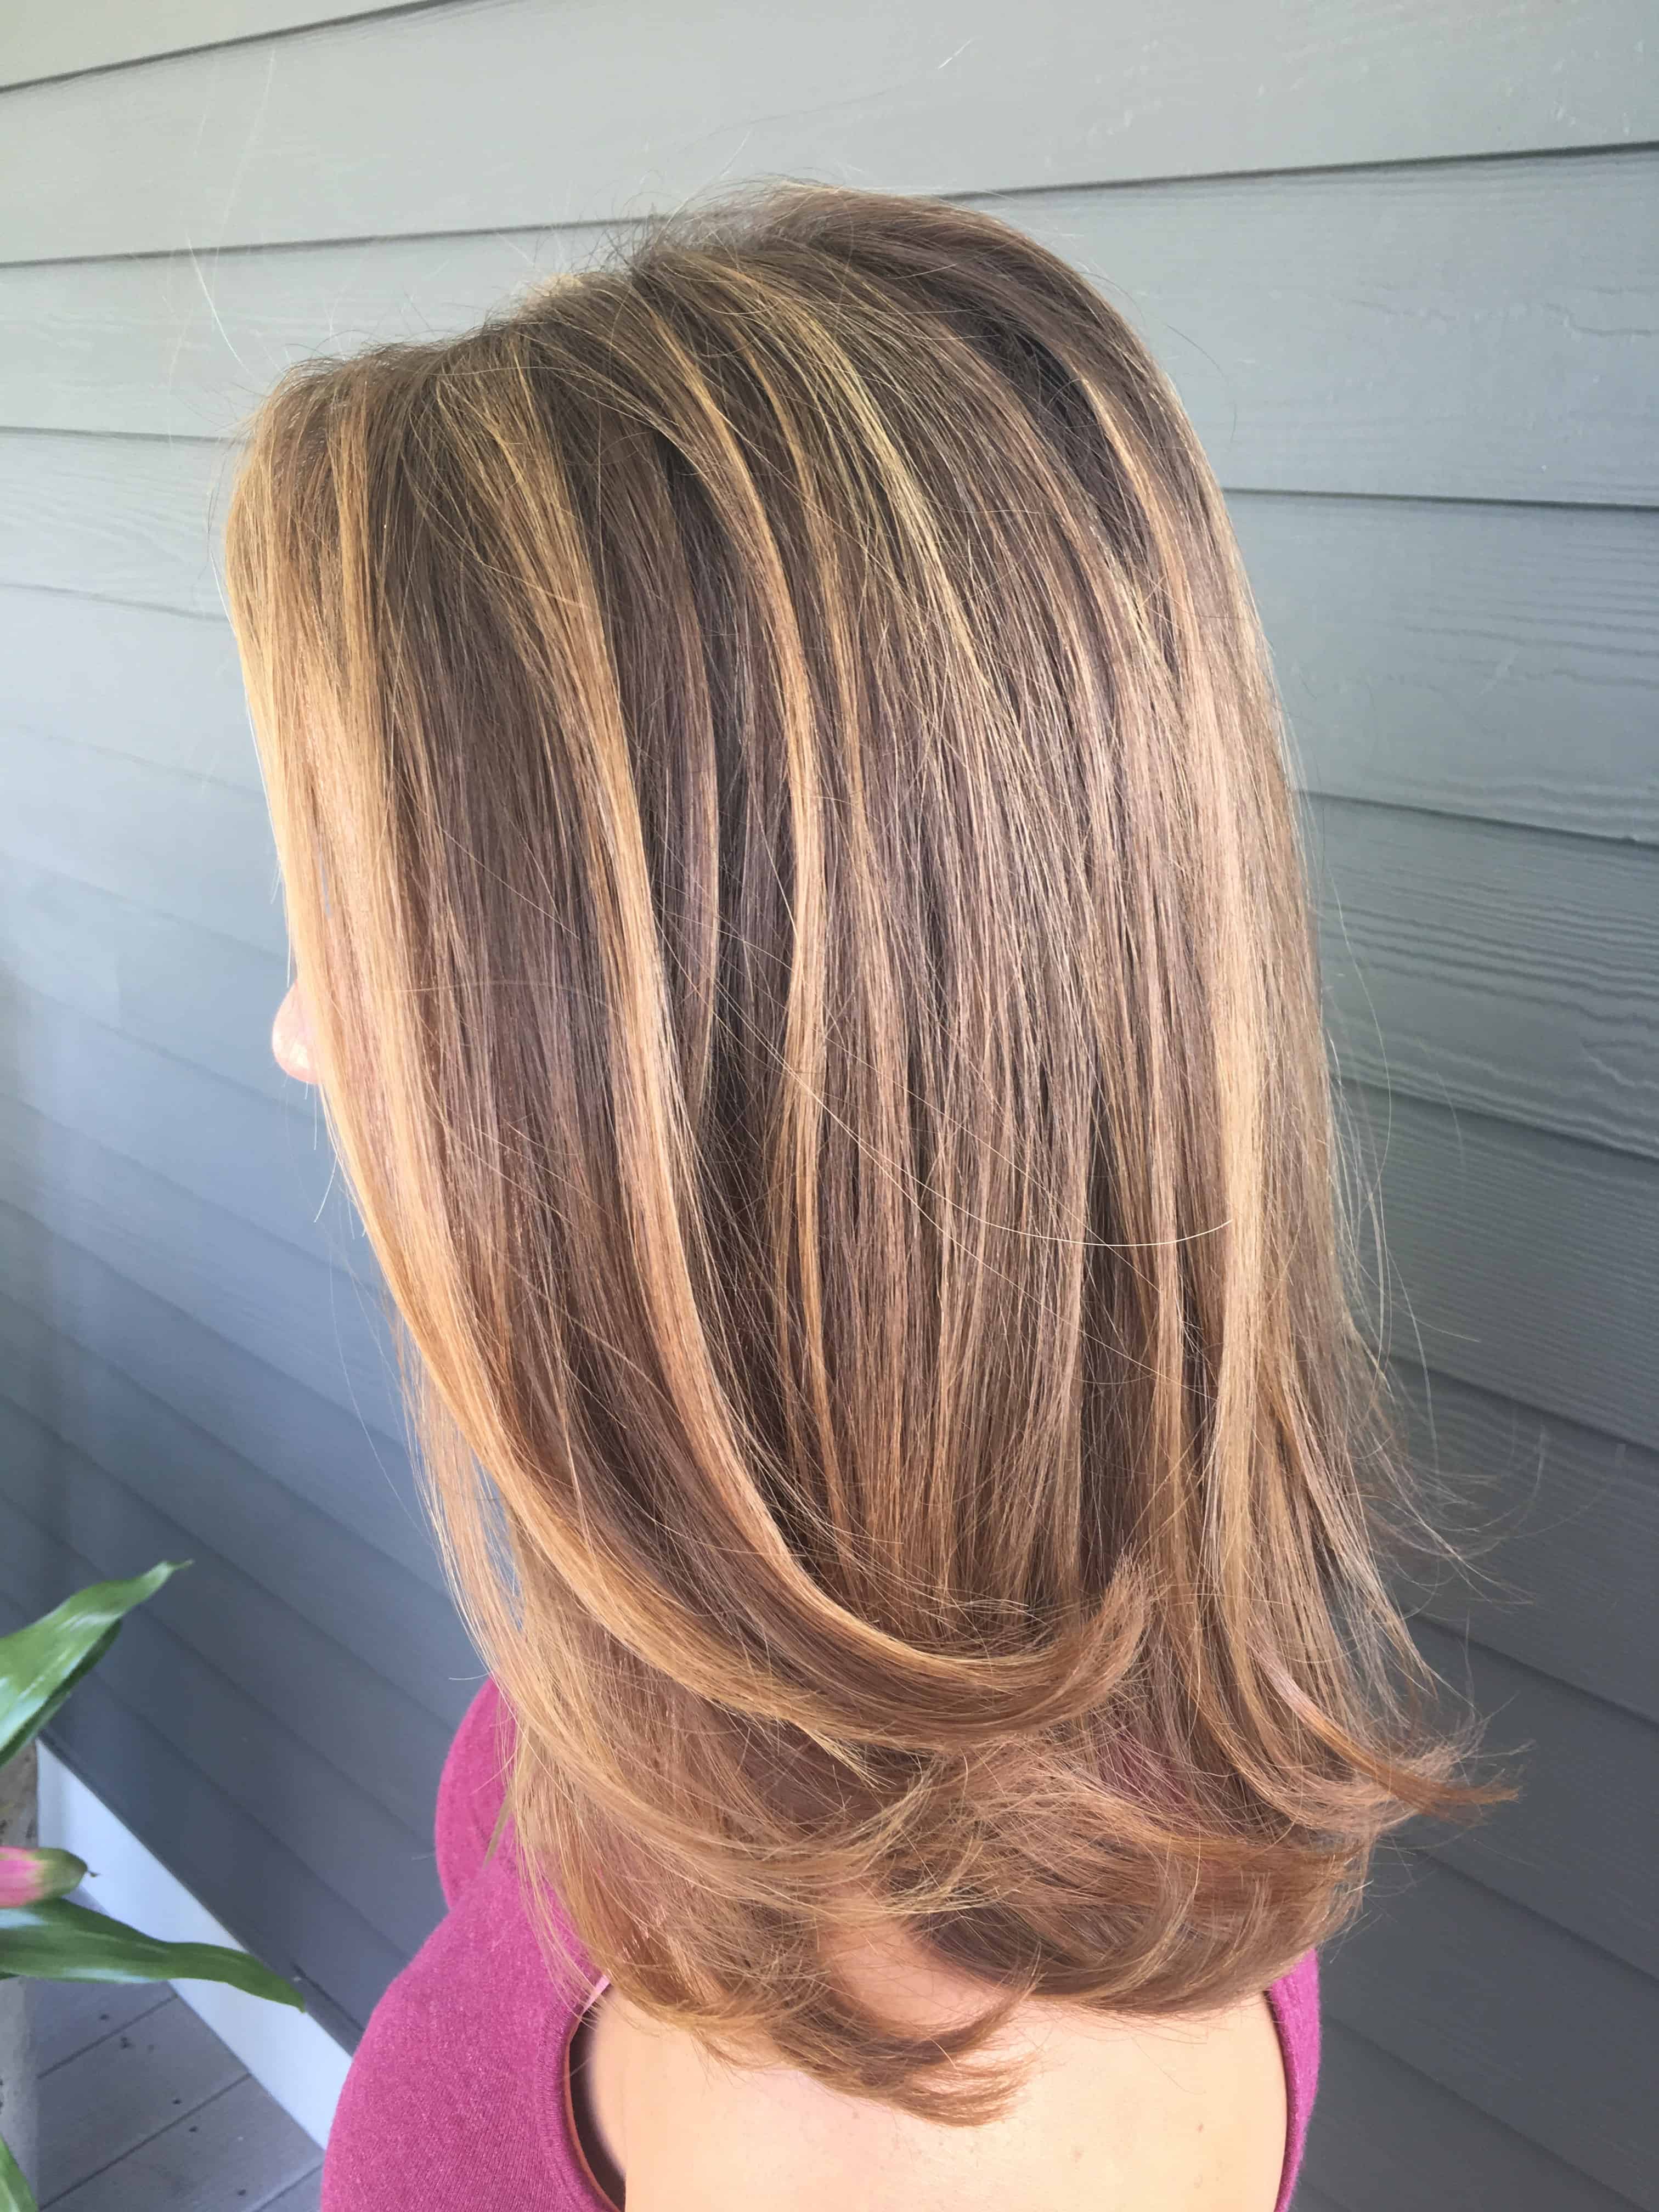 Tampa Hair color & Highlights After - Grand Beauty Hair Salon 